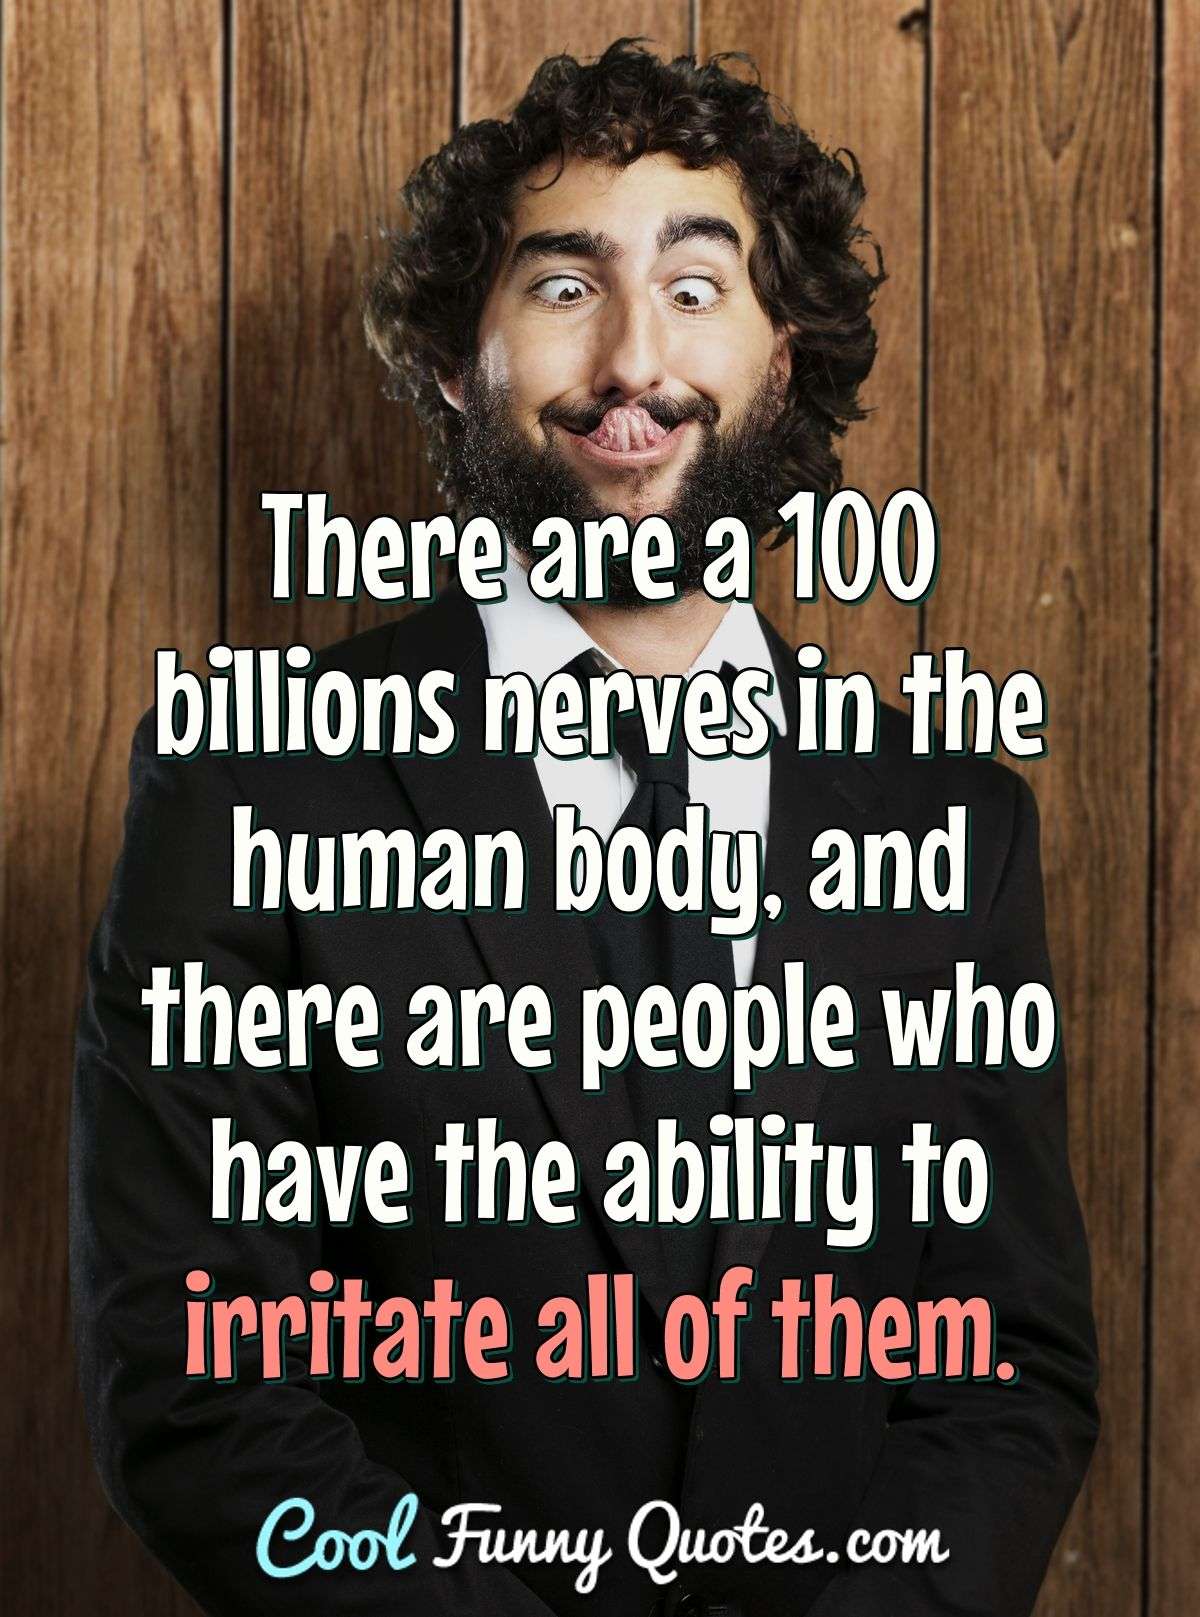 There are a 100 billions nerves in the human body, and there are people who have the ability to irritate all of them. - Anonymous